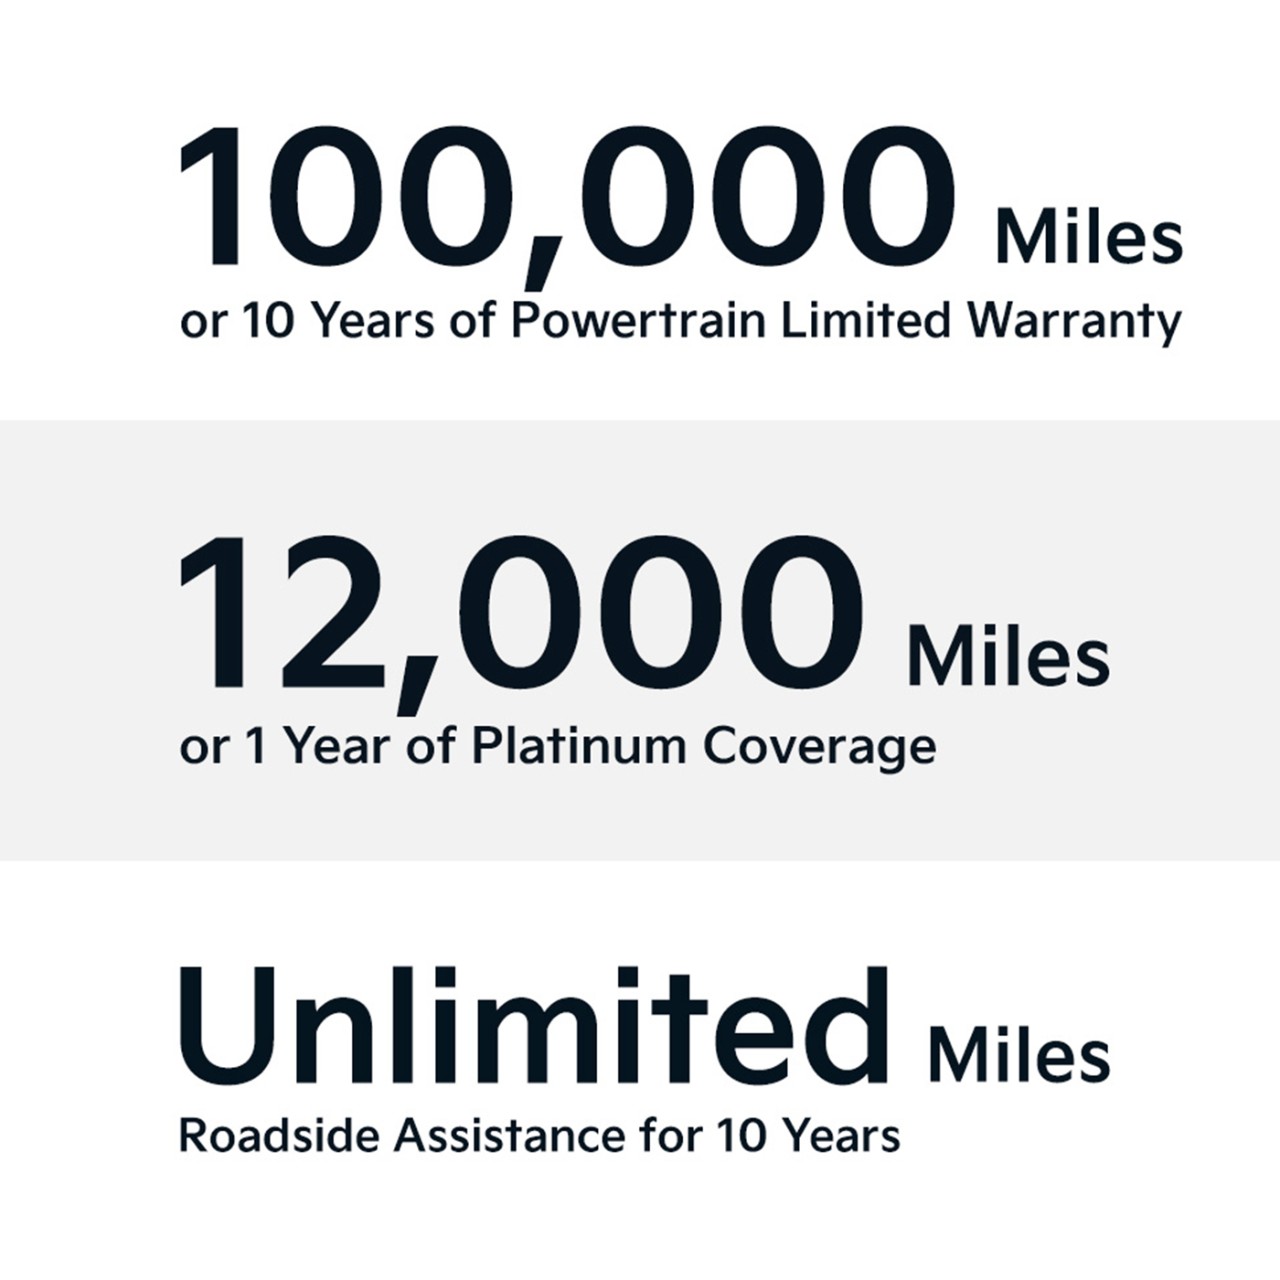 A text image describing the warranty highlighs: 100,000 Miles or 10 years of Powertrain Limited Warranty; 12,000 Miles or 1 year of Platinum Coverage; and Unlimited Miles with Roadside Assistance for 10 years.